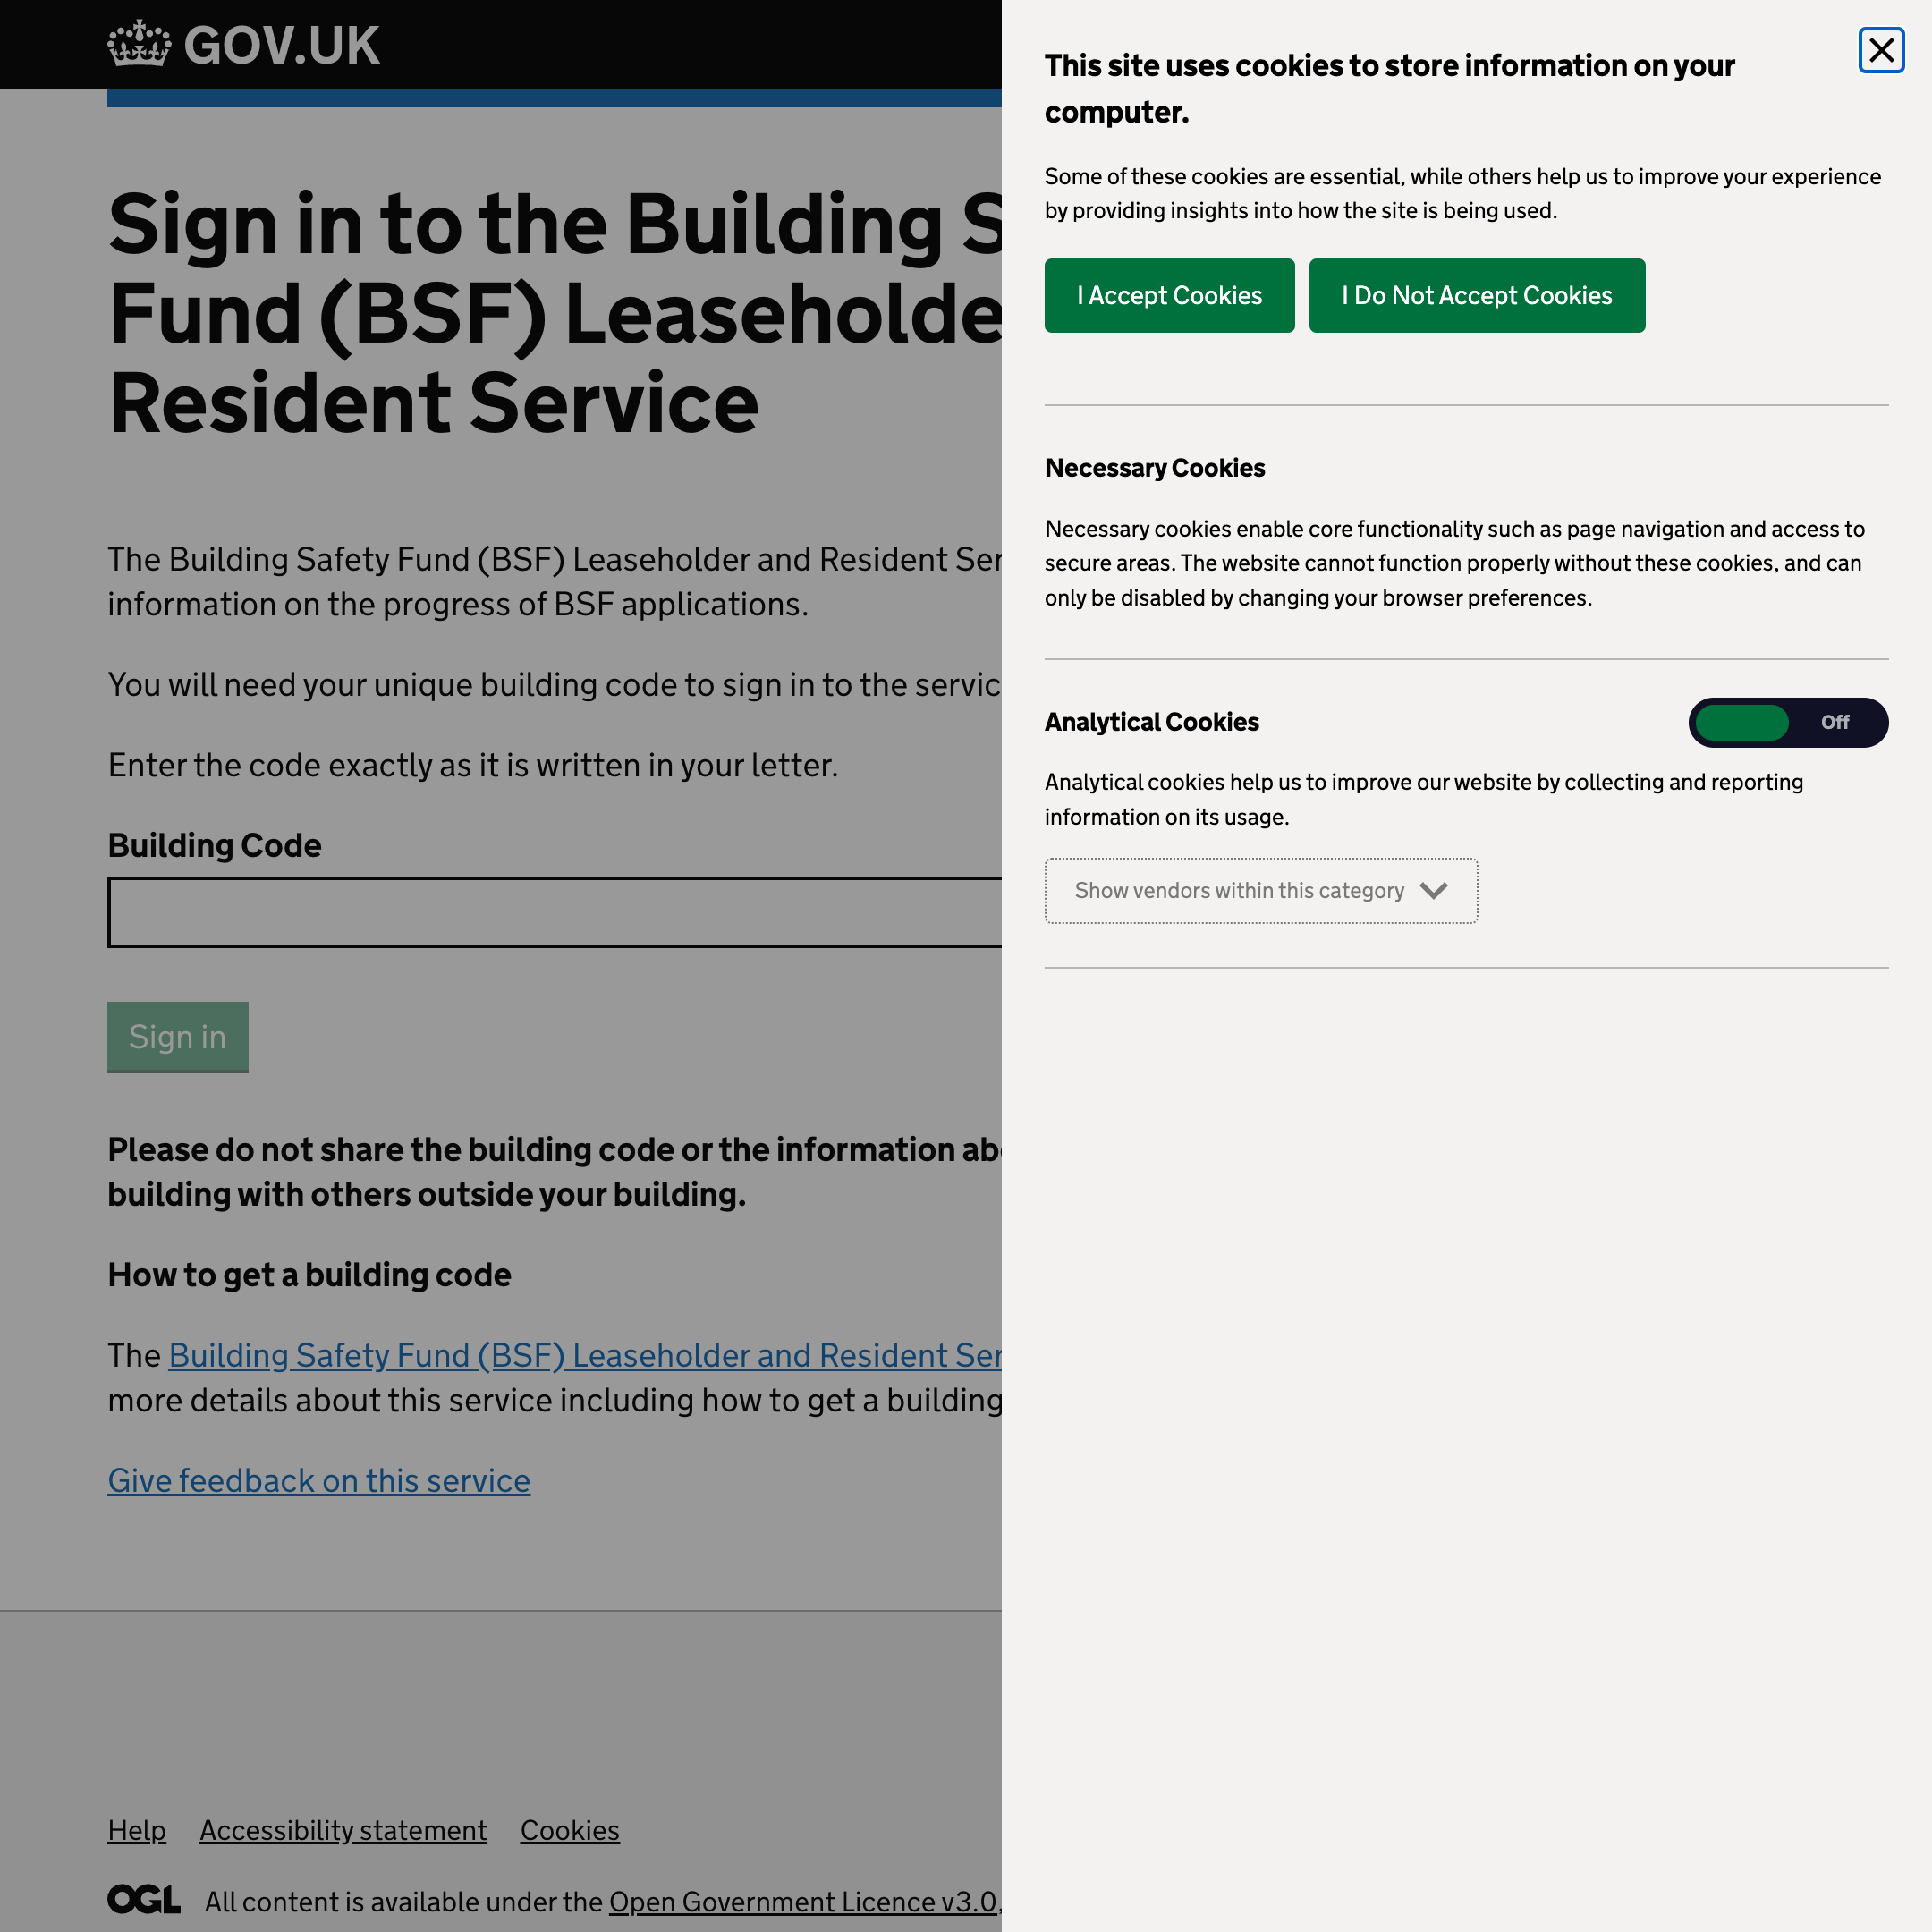 Building Safety Fund Leaseholder and Resident Service